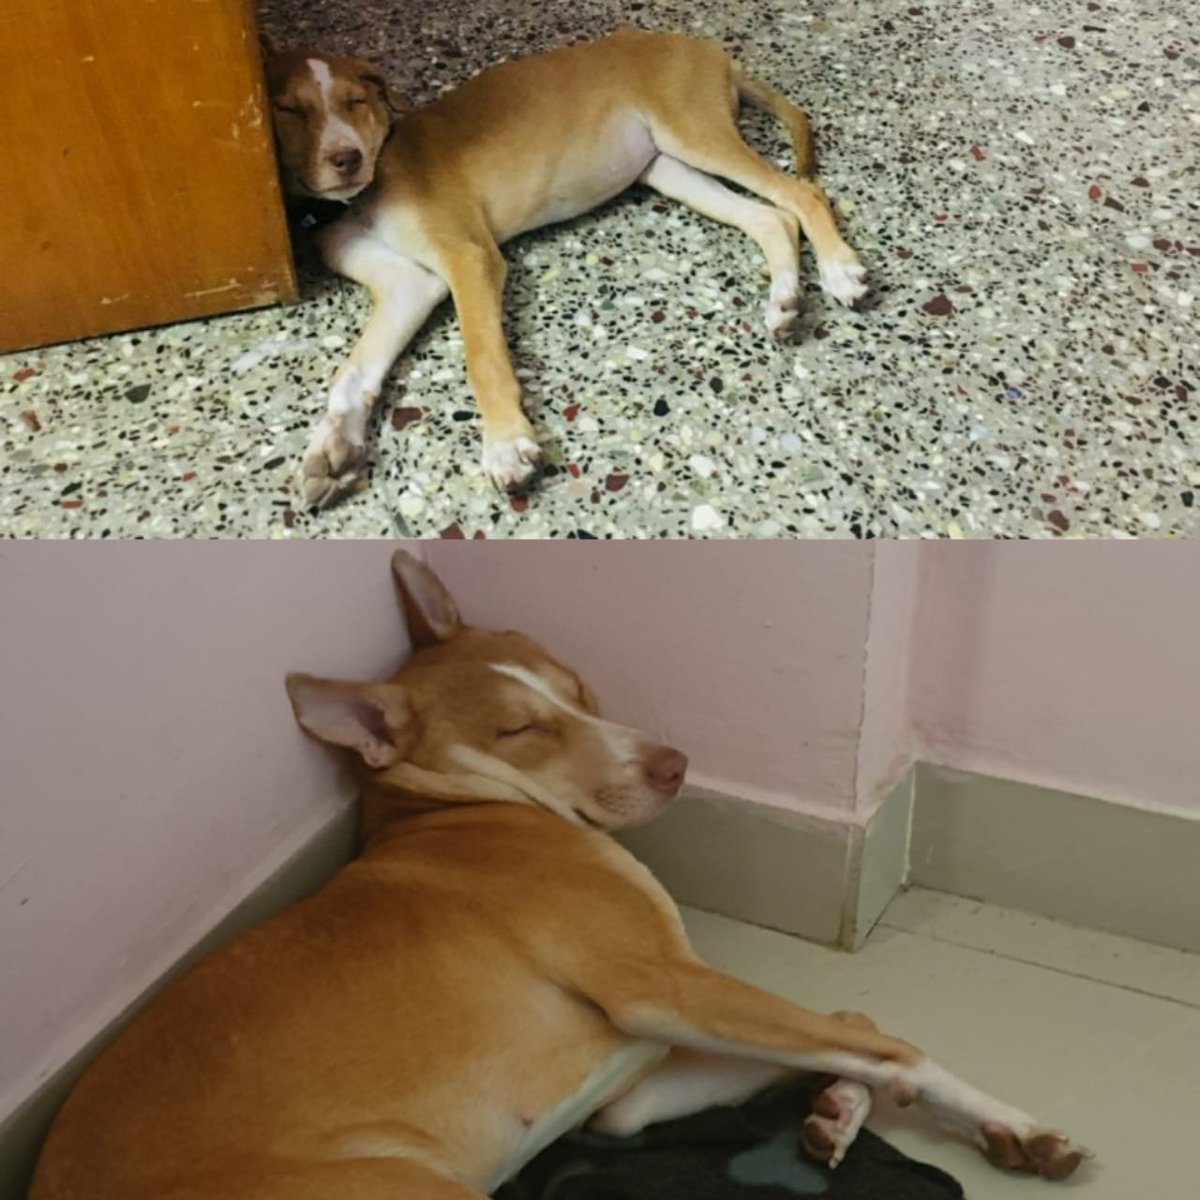 The reason I’m writing all of this right now is because RIGHT NOW is the best time for YOU to adopt a pet. Why? I'll tell you, and I'll also tell you why you should adopt.(Meanwhile this is a picture of Paris when she was 30 days old and today. Some things never change.)